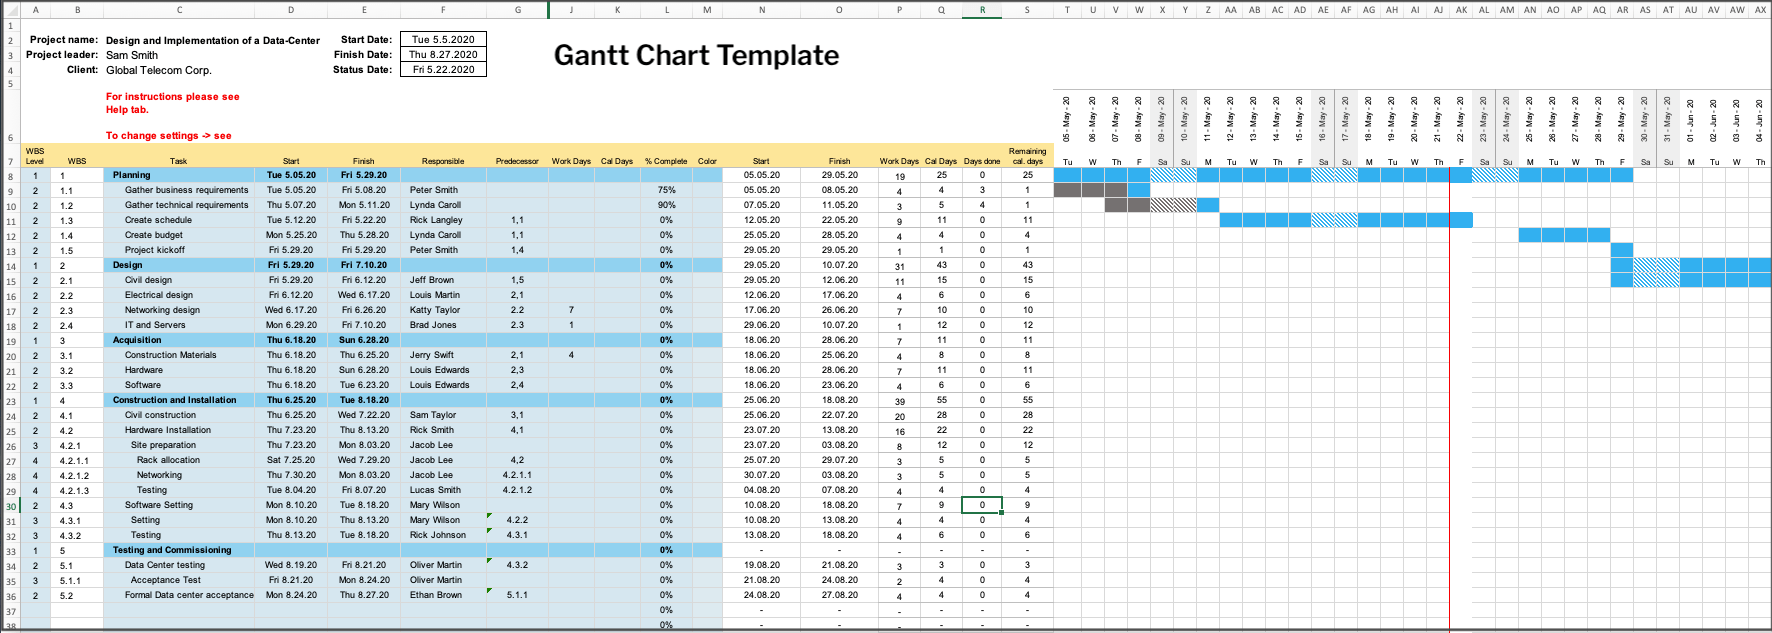 The Gantt chart template can be edited in Excel